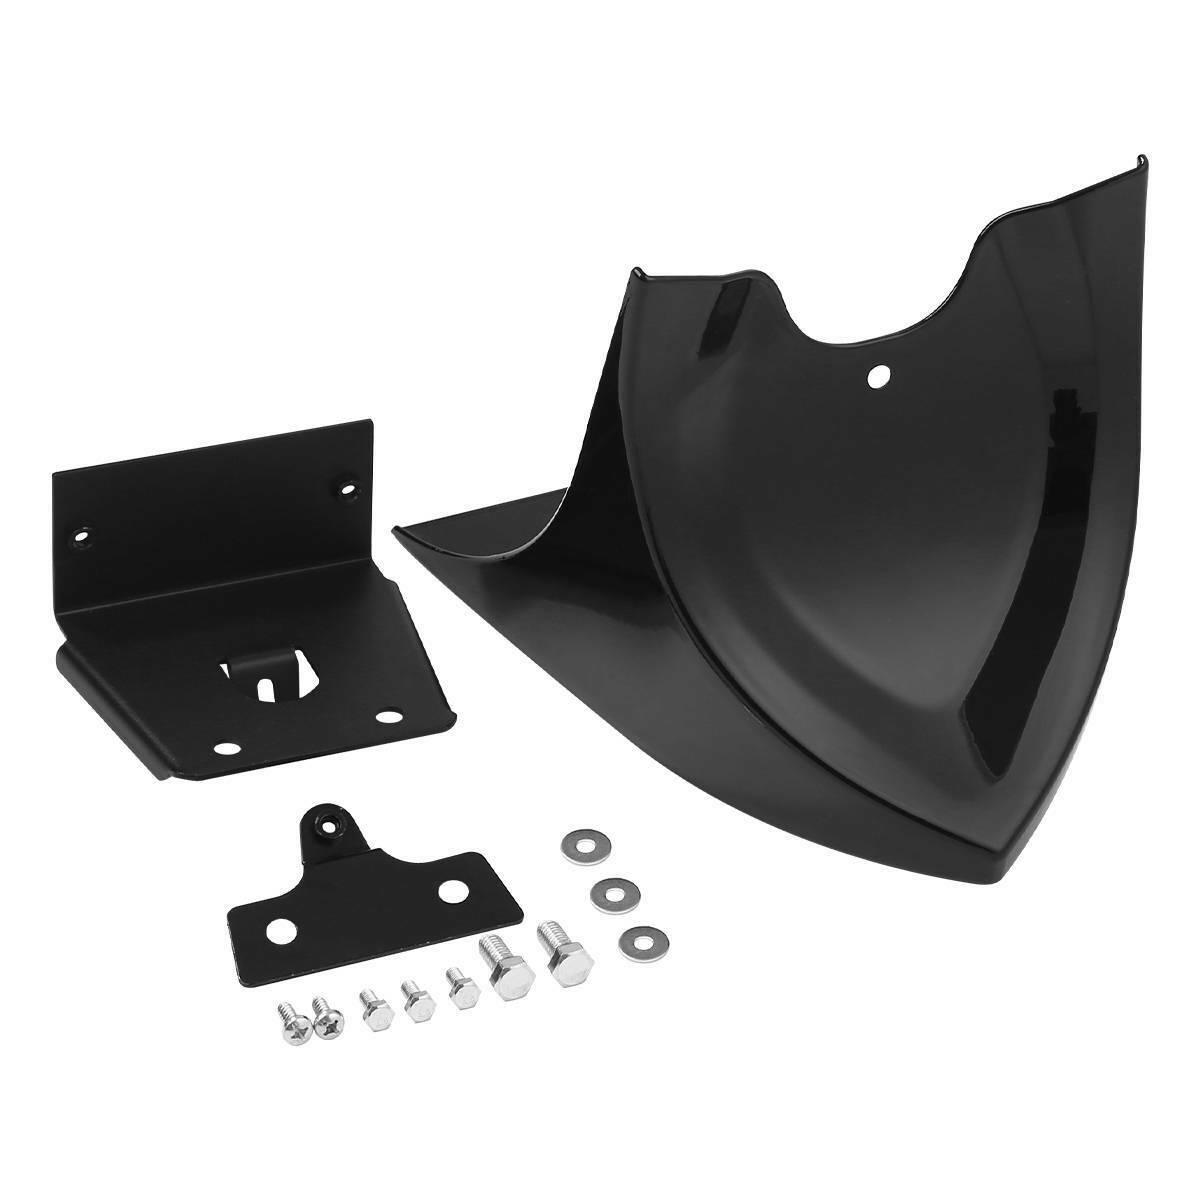 Front Chin Spoiler Fairing Mudguard For Harley Davidson Sportster 883 1200 04-18 - Moto Life Products